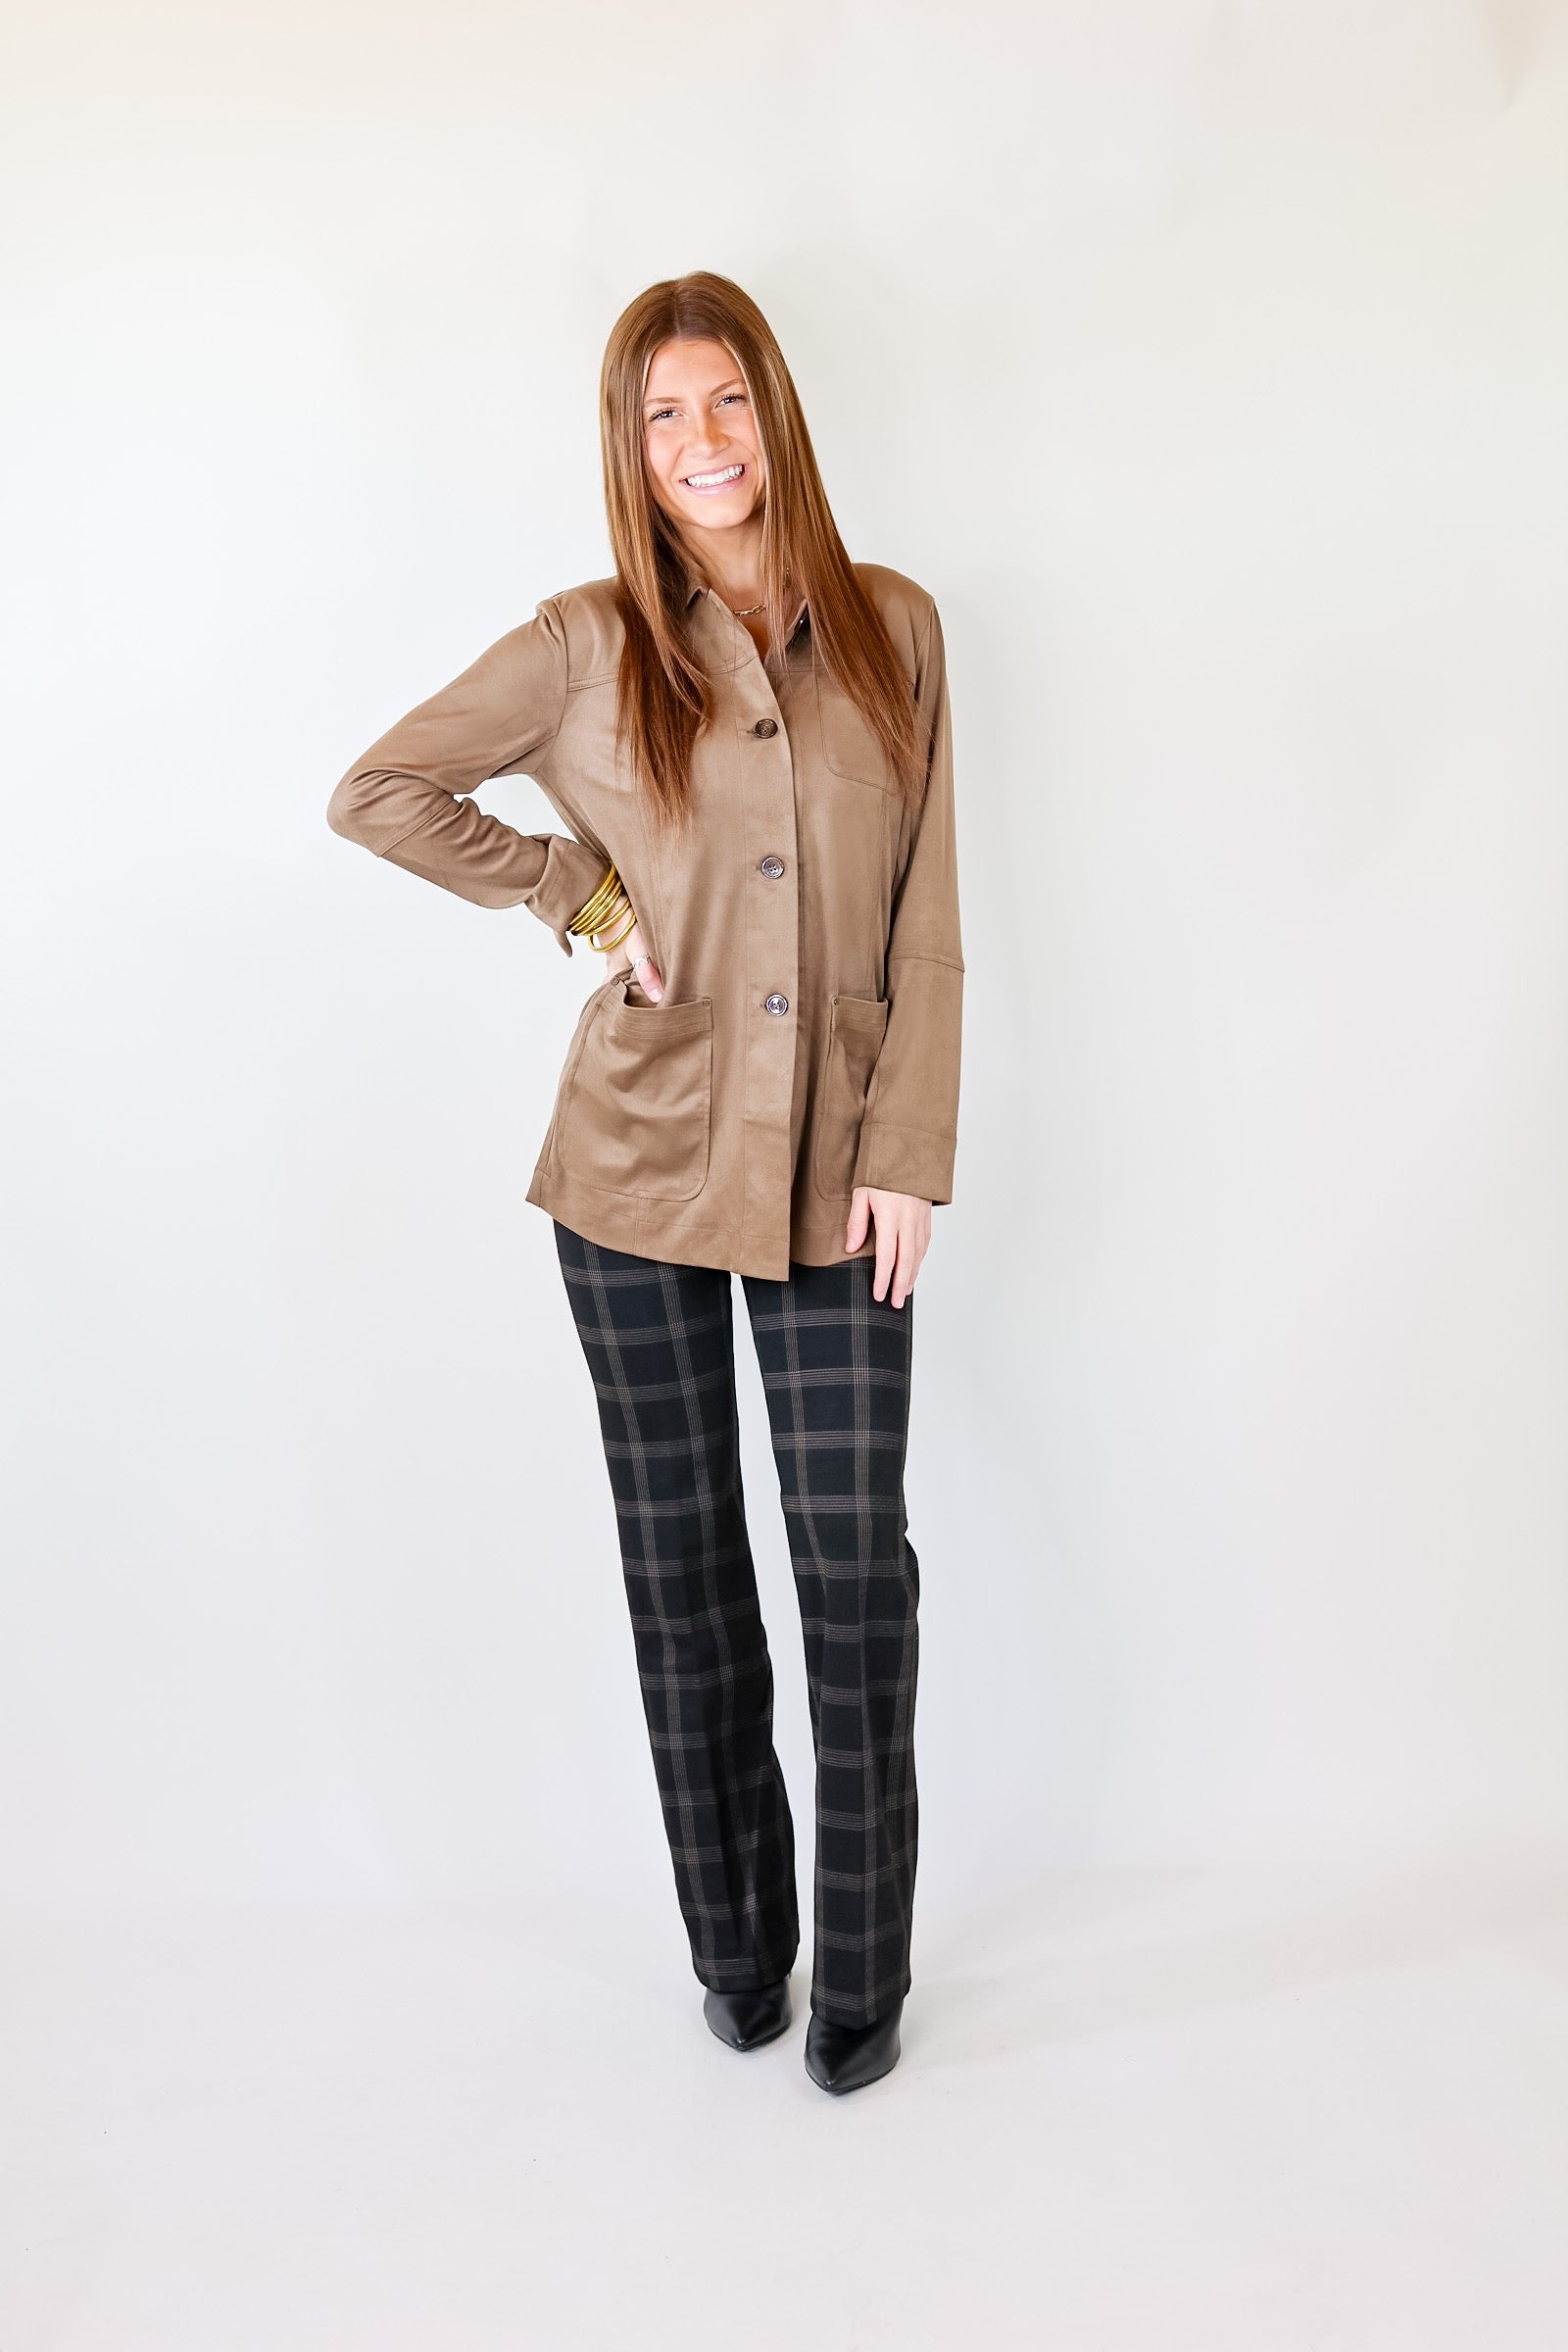 Lyssé | Abigail Suede Button Up Jacket in Chestnut Brown - Giddy Up Glamour Boutique